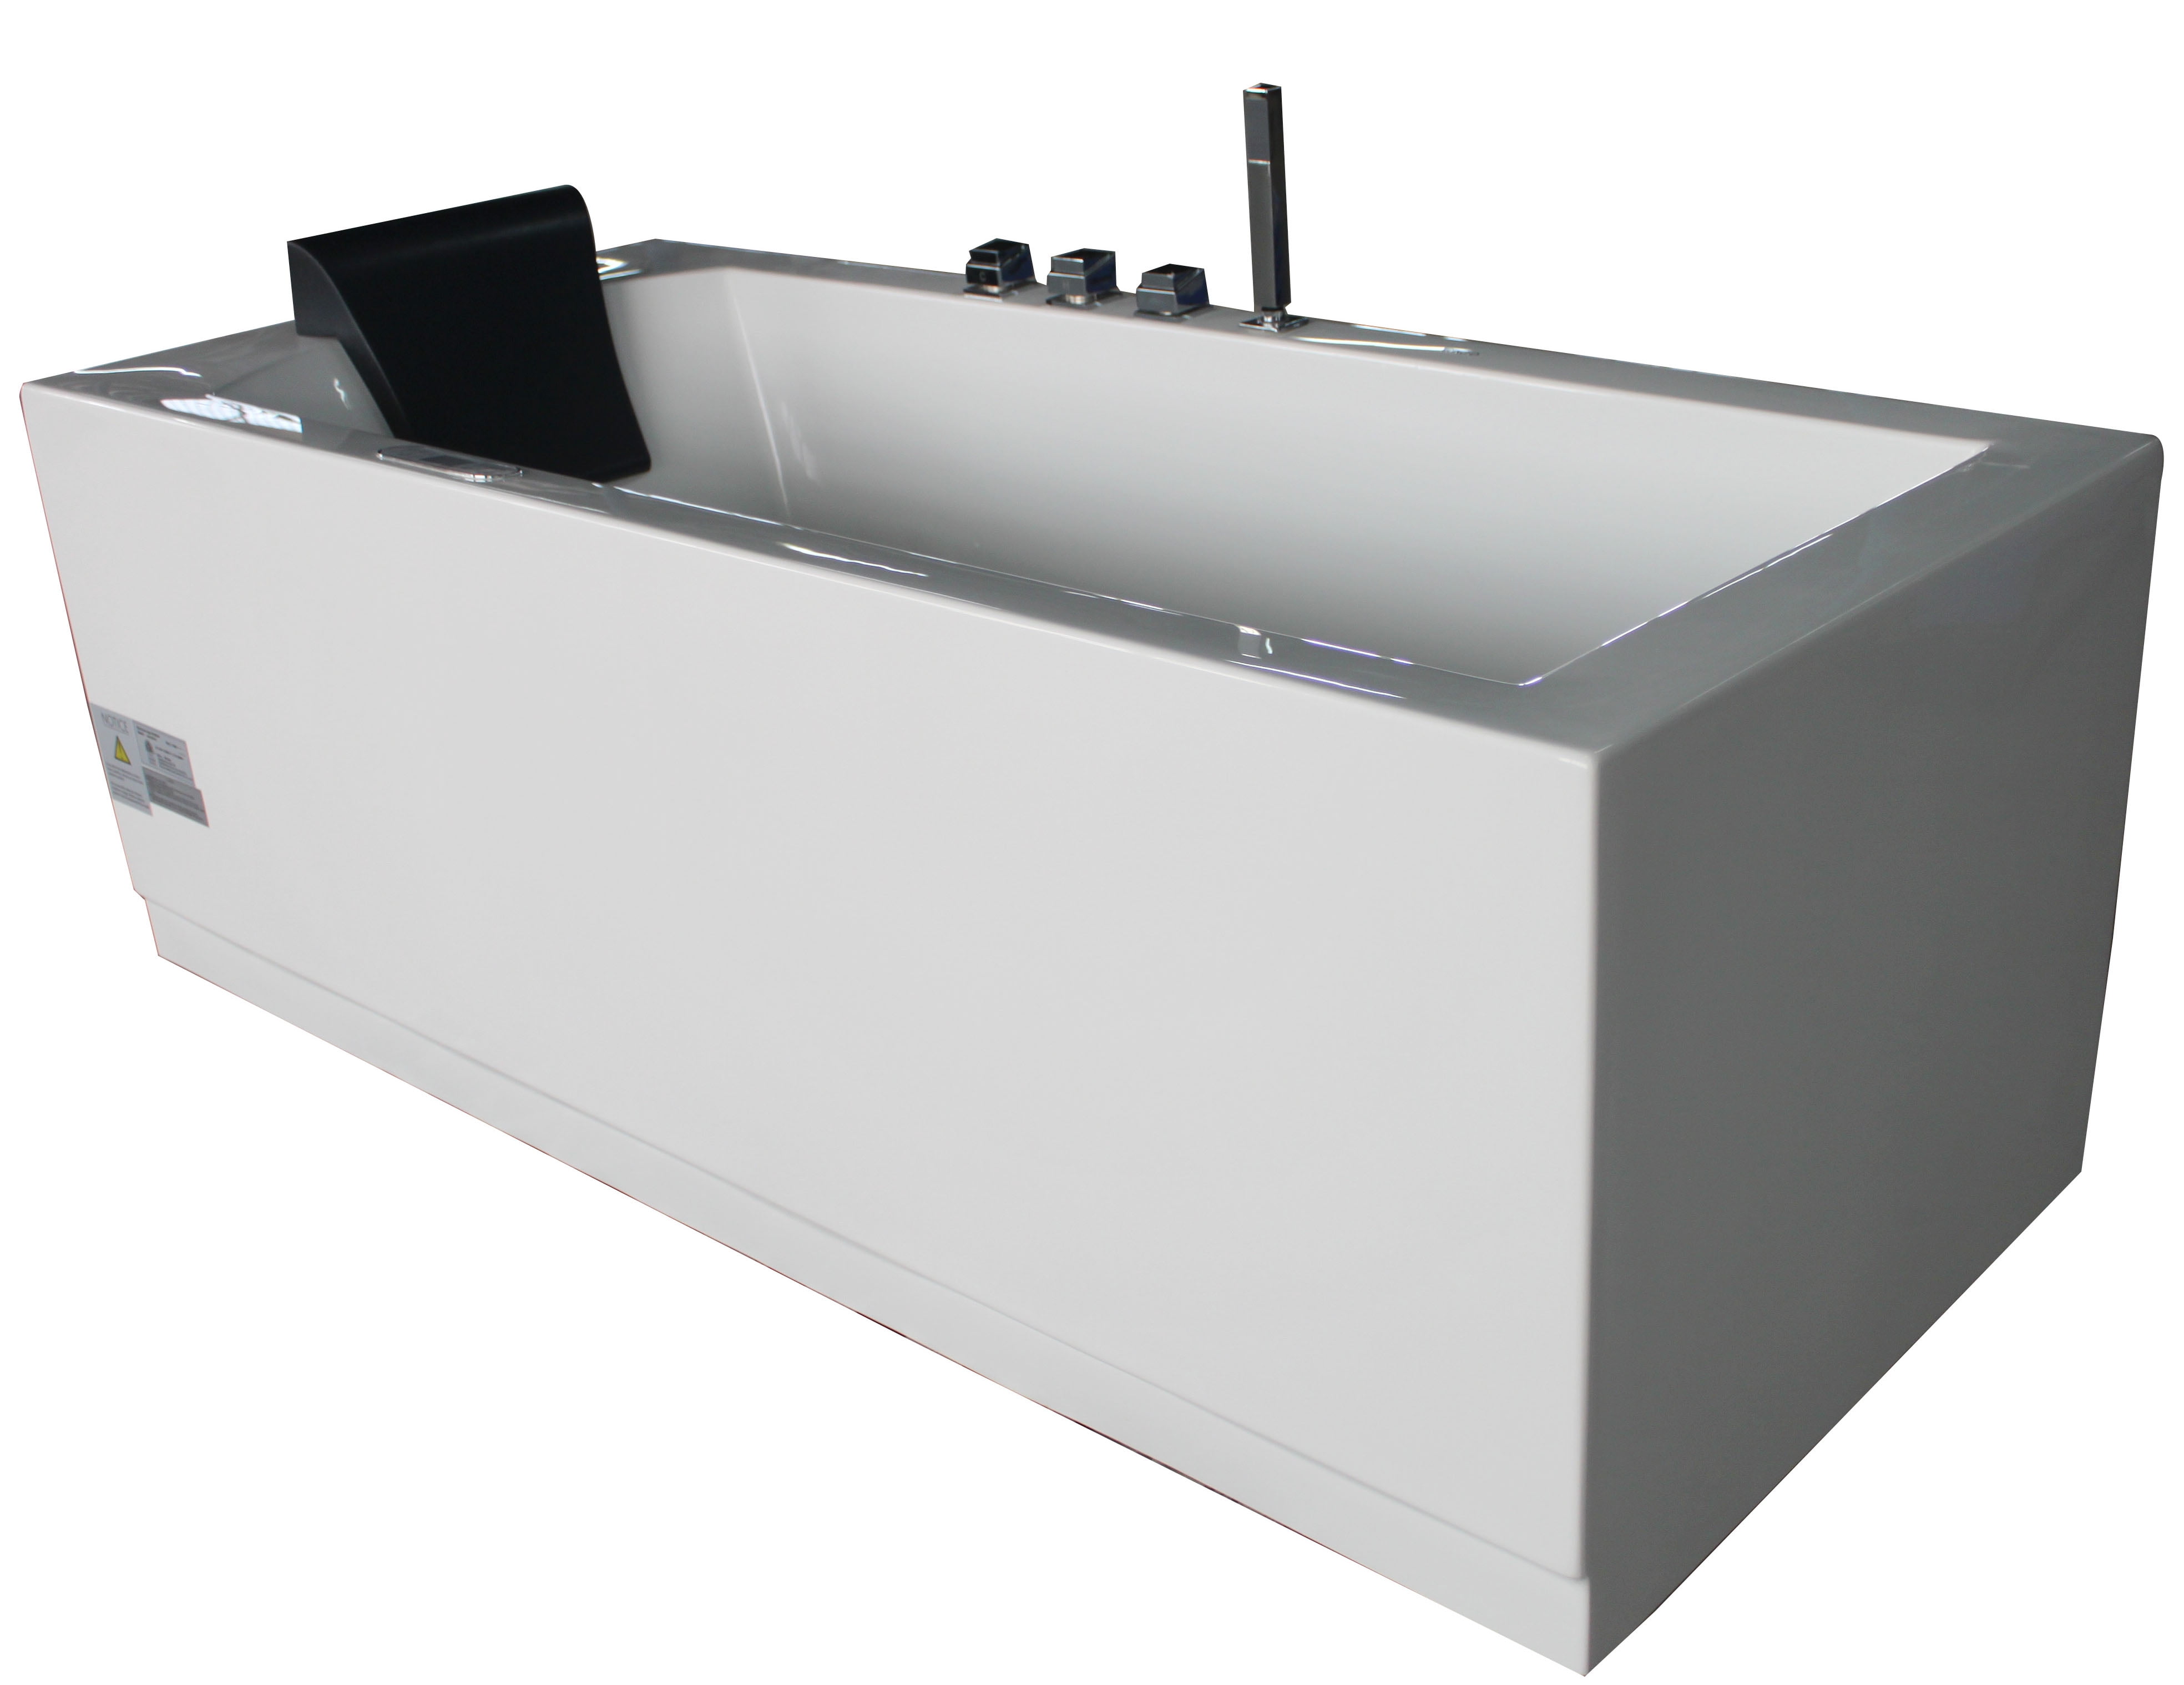 Am154etl-r6 6 Ft. Acrylic White Rectangular Whirlpool Tub With Fixtures - Right